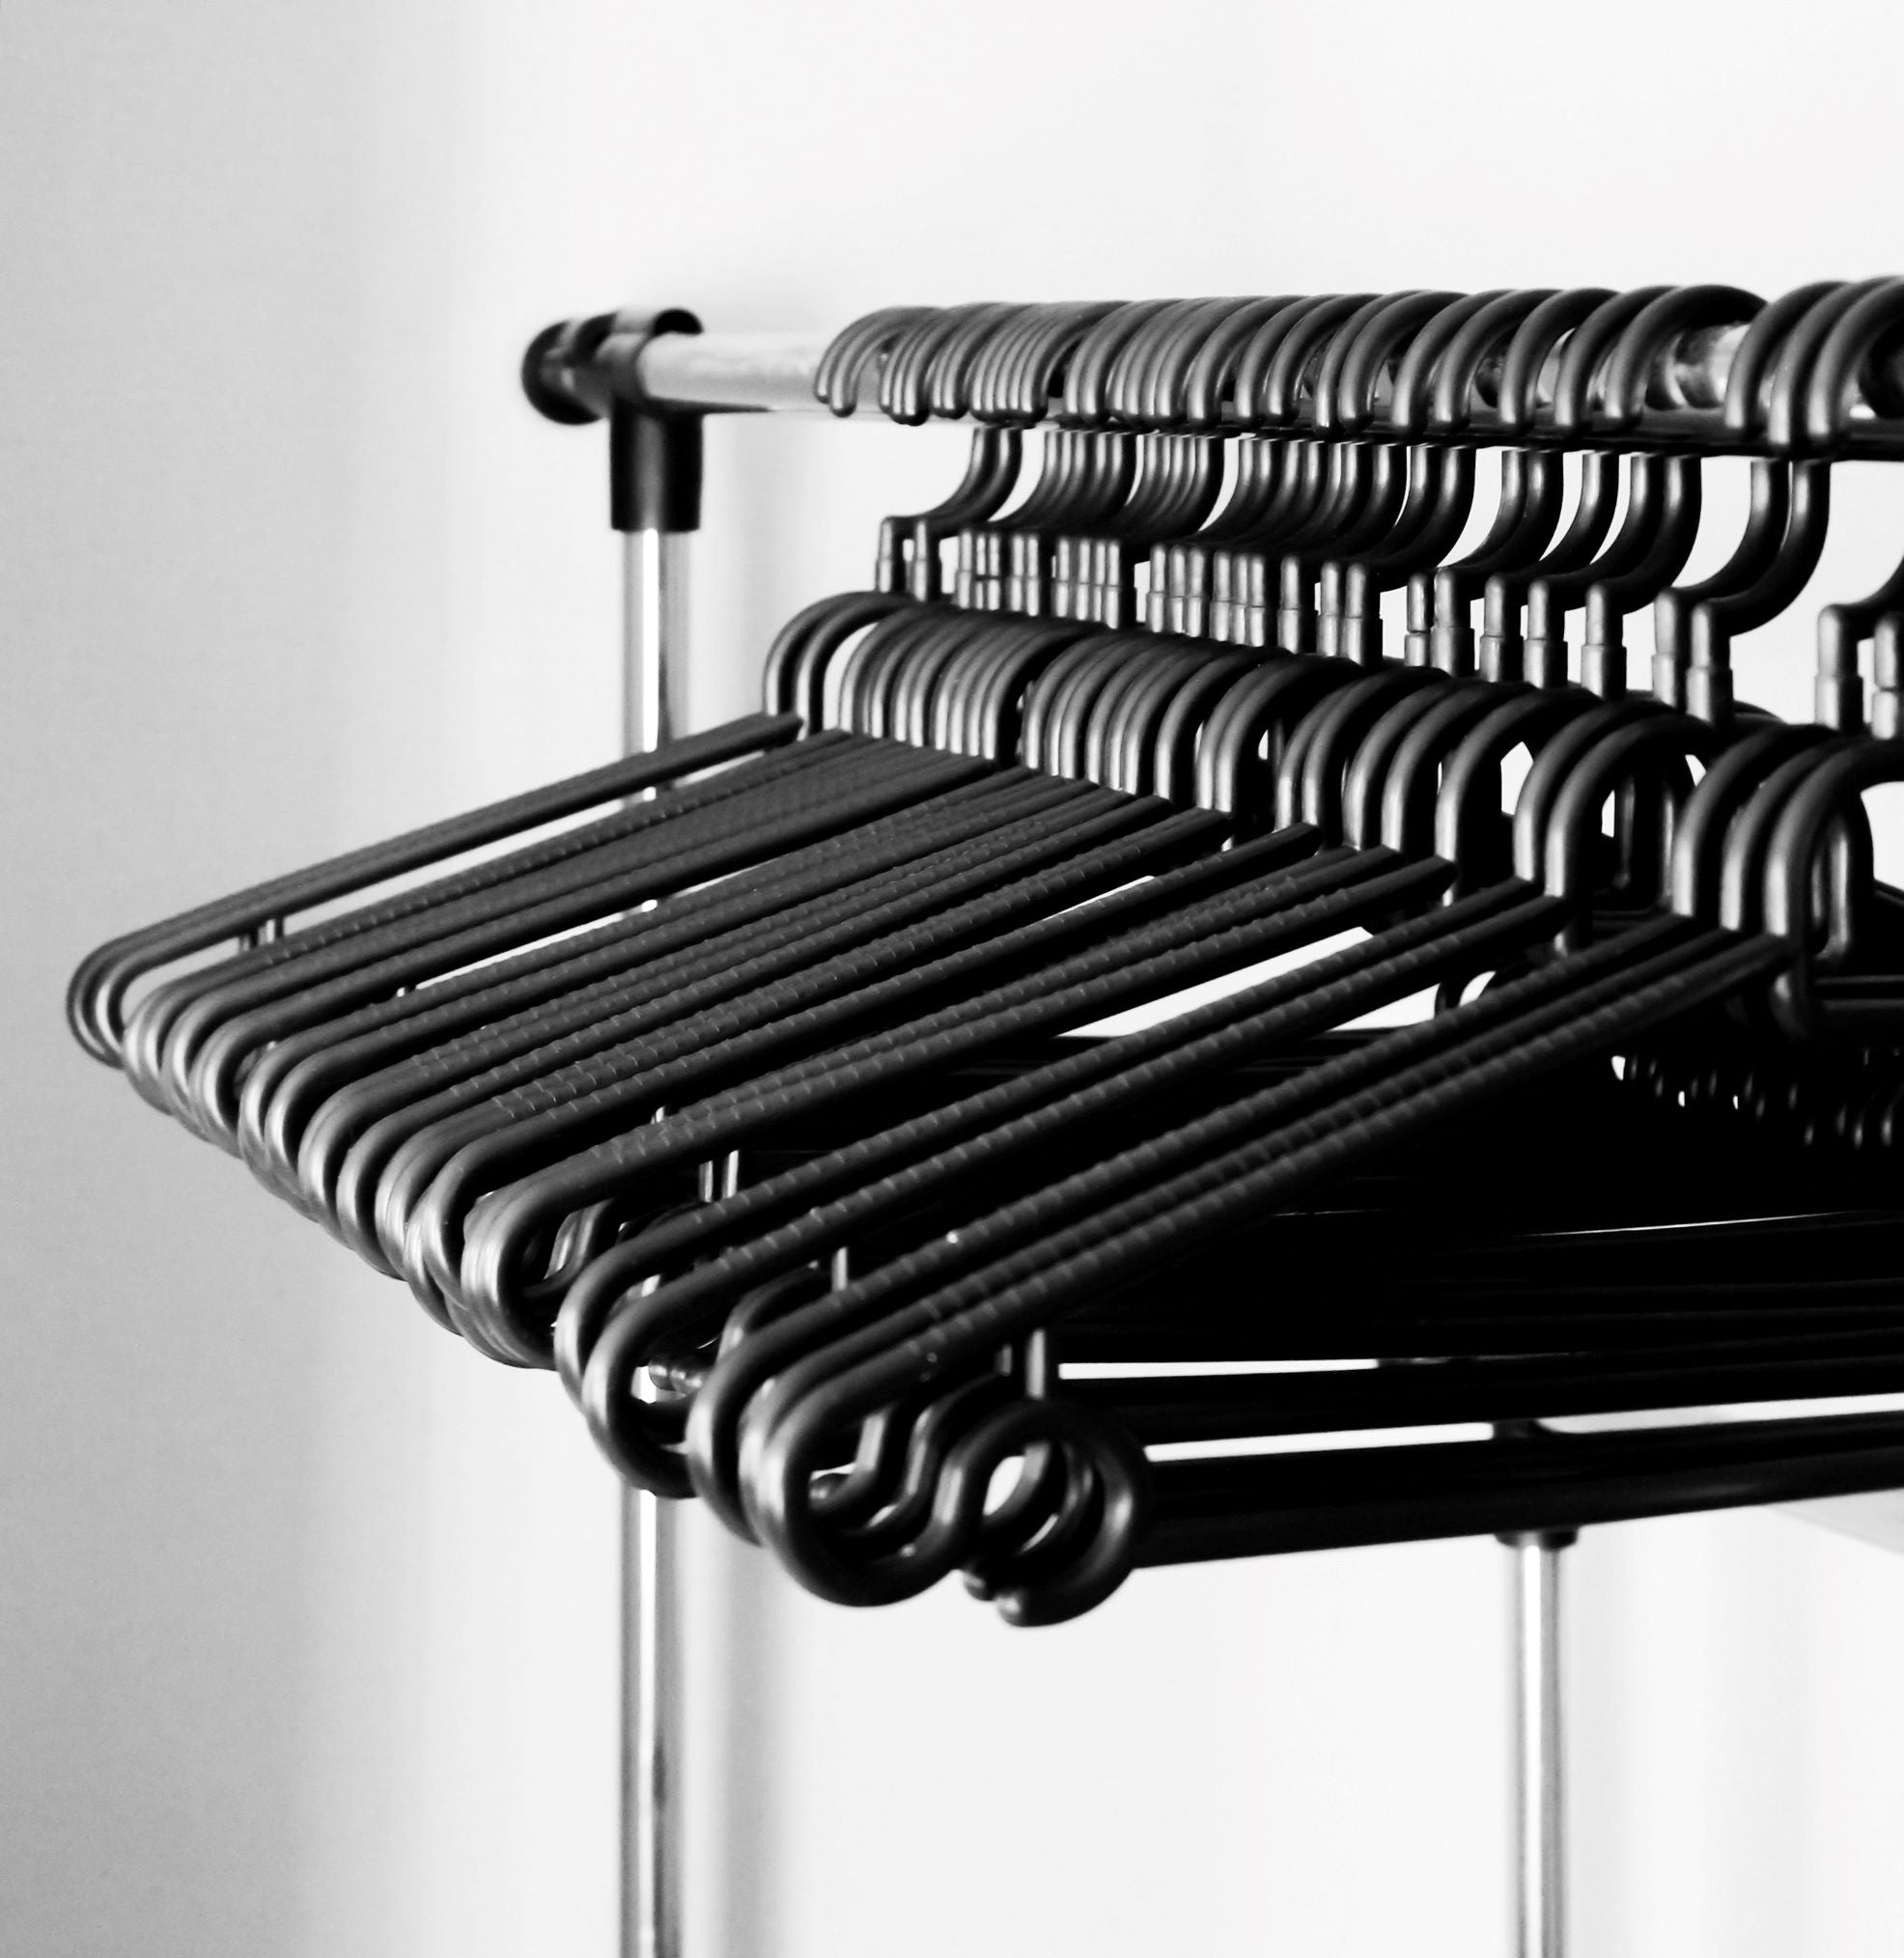 Black hangers made of moulded plastic stored on the closet rod